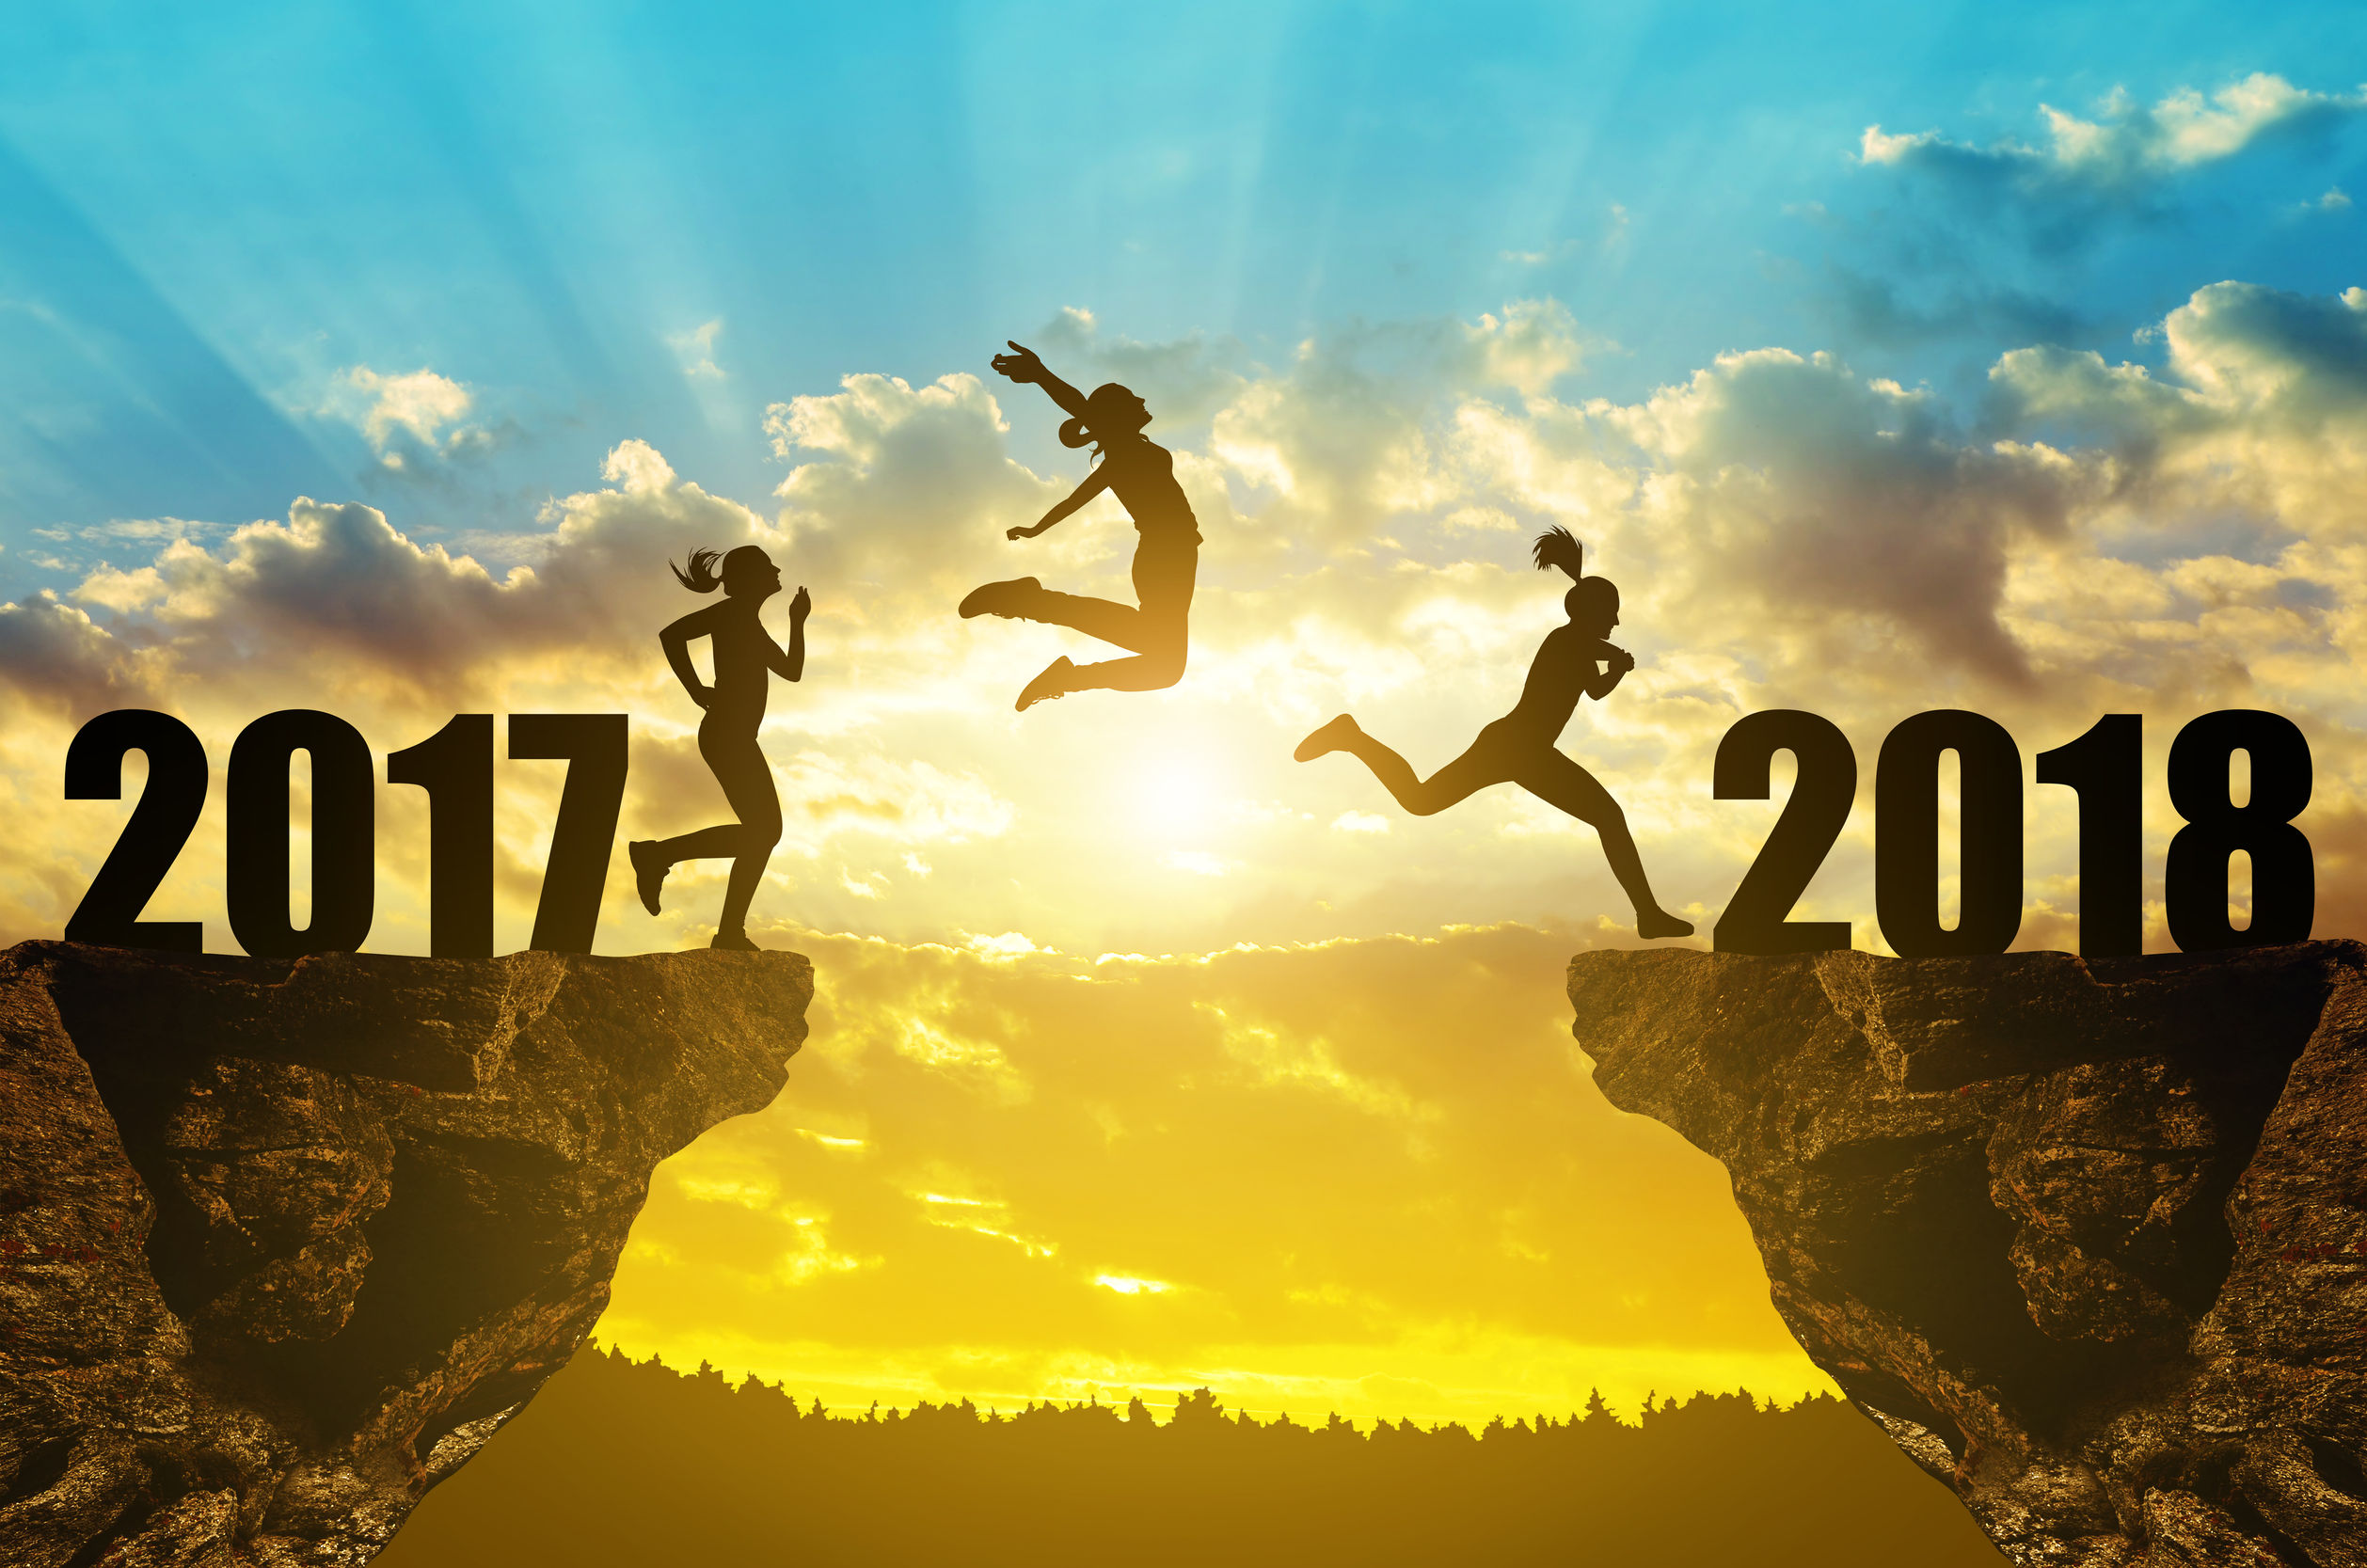 Live Purposely in the New Year, by Dr. Dan Peters